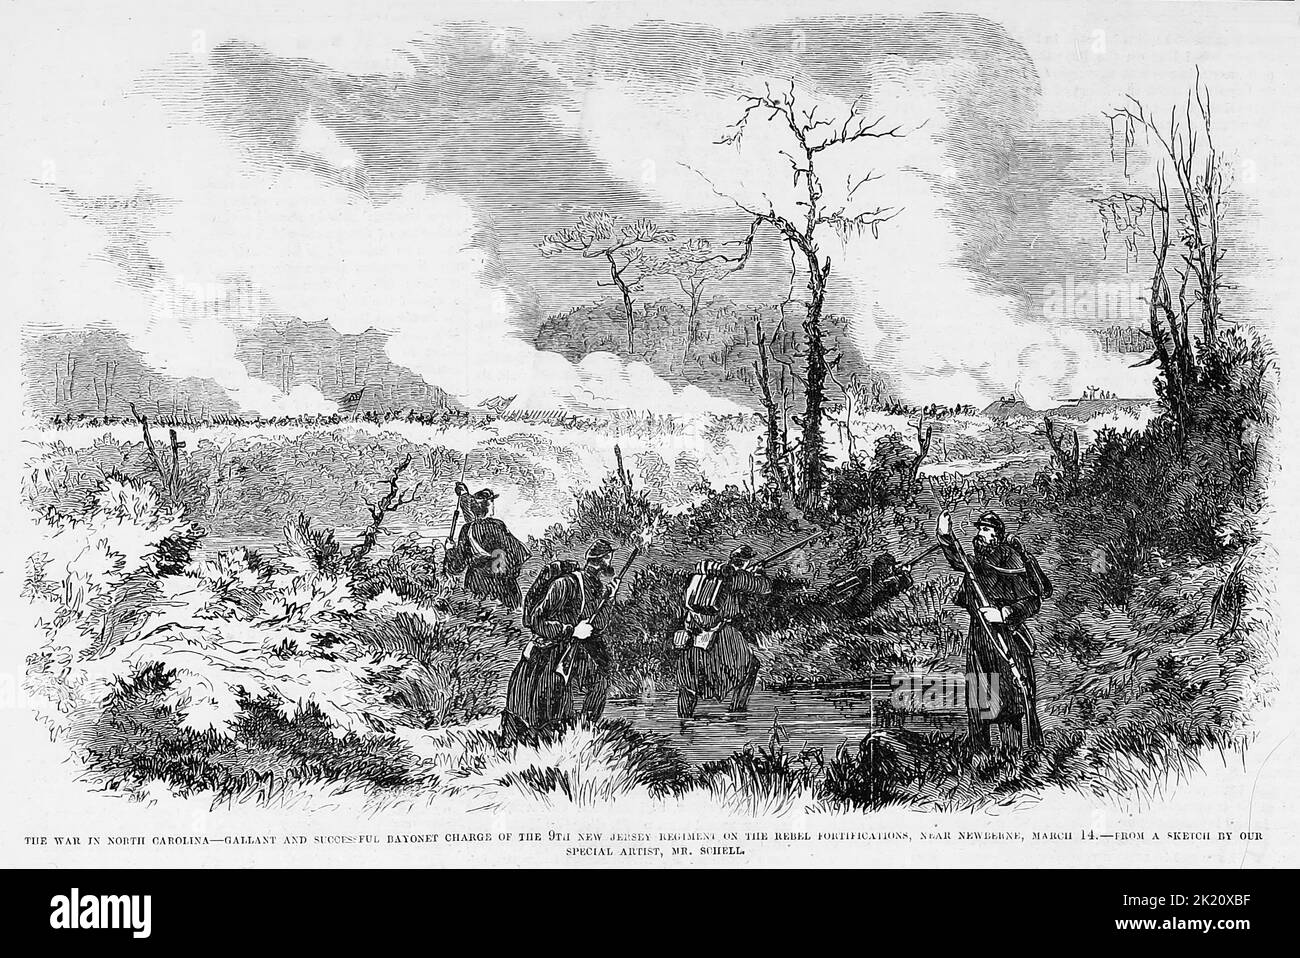 The War in North Carolina - Gallant and successful bayonet charge of the 9th New Jersey Regiment on the Rebel fortifications, near New Bern, March 14th, 1862. Battle of New Bern. 19th century American Civil War illustration from Frank Leslie's Illustrated Newspaper Stock Photo